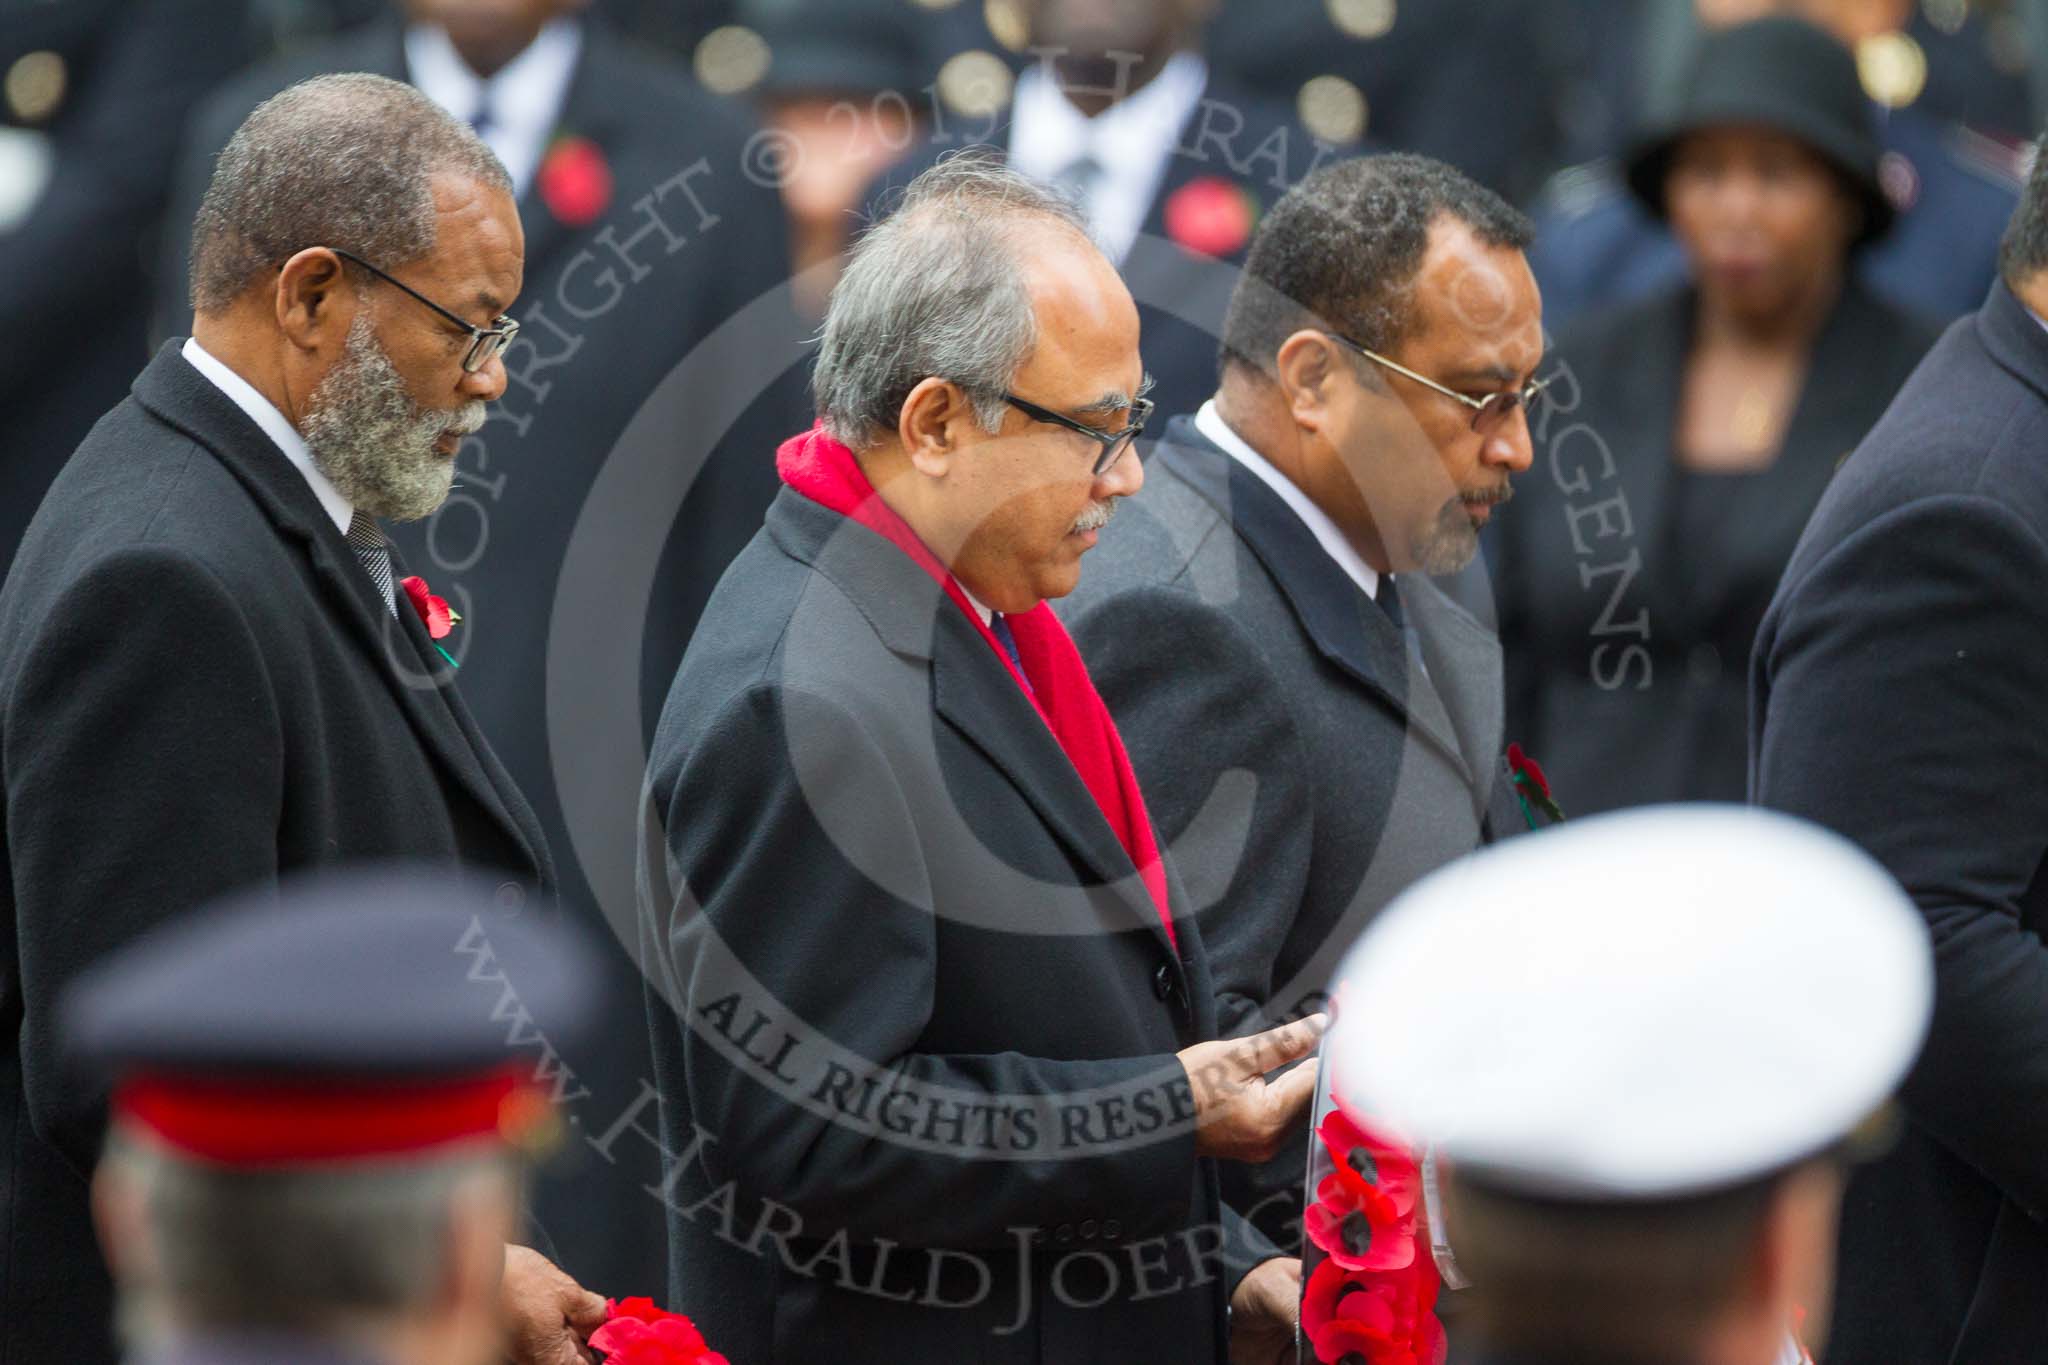 Remembrance Sunday at the Cenotaph 2015: The High Commissioners of The Bahamas, Bangladesh, and Fiji standing at the Cenotaph with their wreaths. Image #245, 08 November 2015 11:11 Whitehall, London, UK